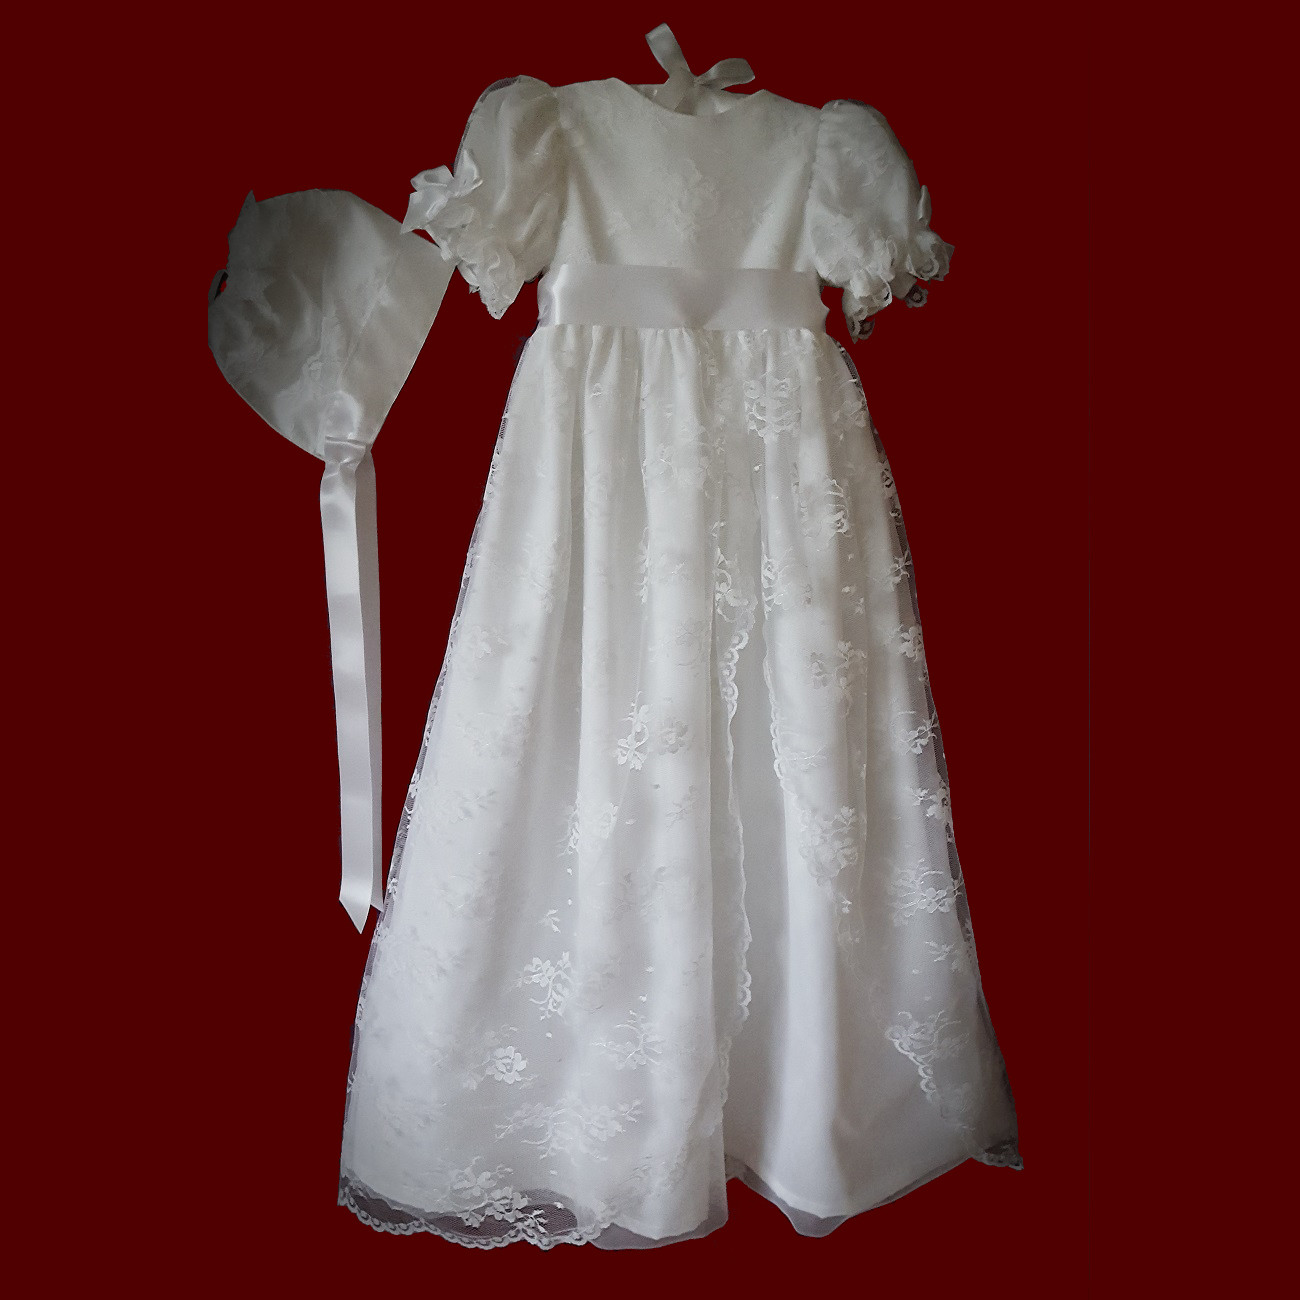 Chantilly Lace Girls Christening Gown, Personalized Slip & Bonnet